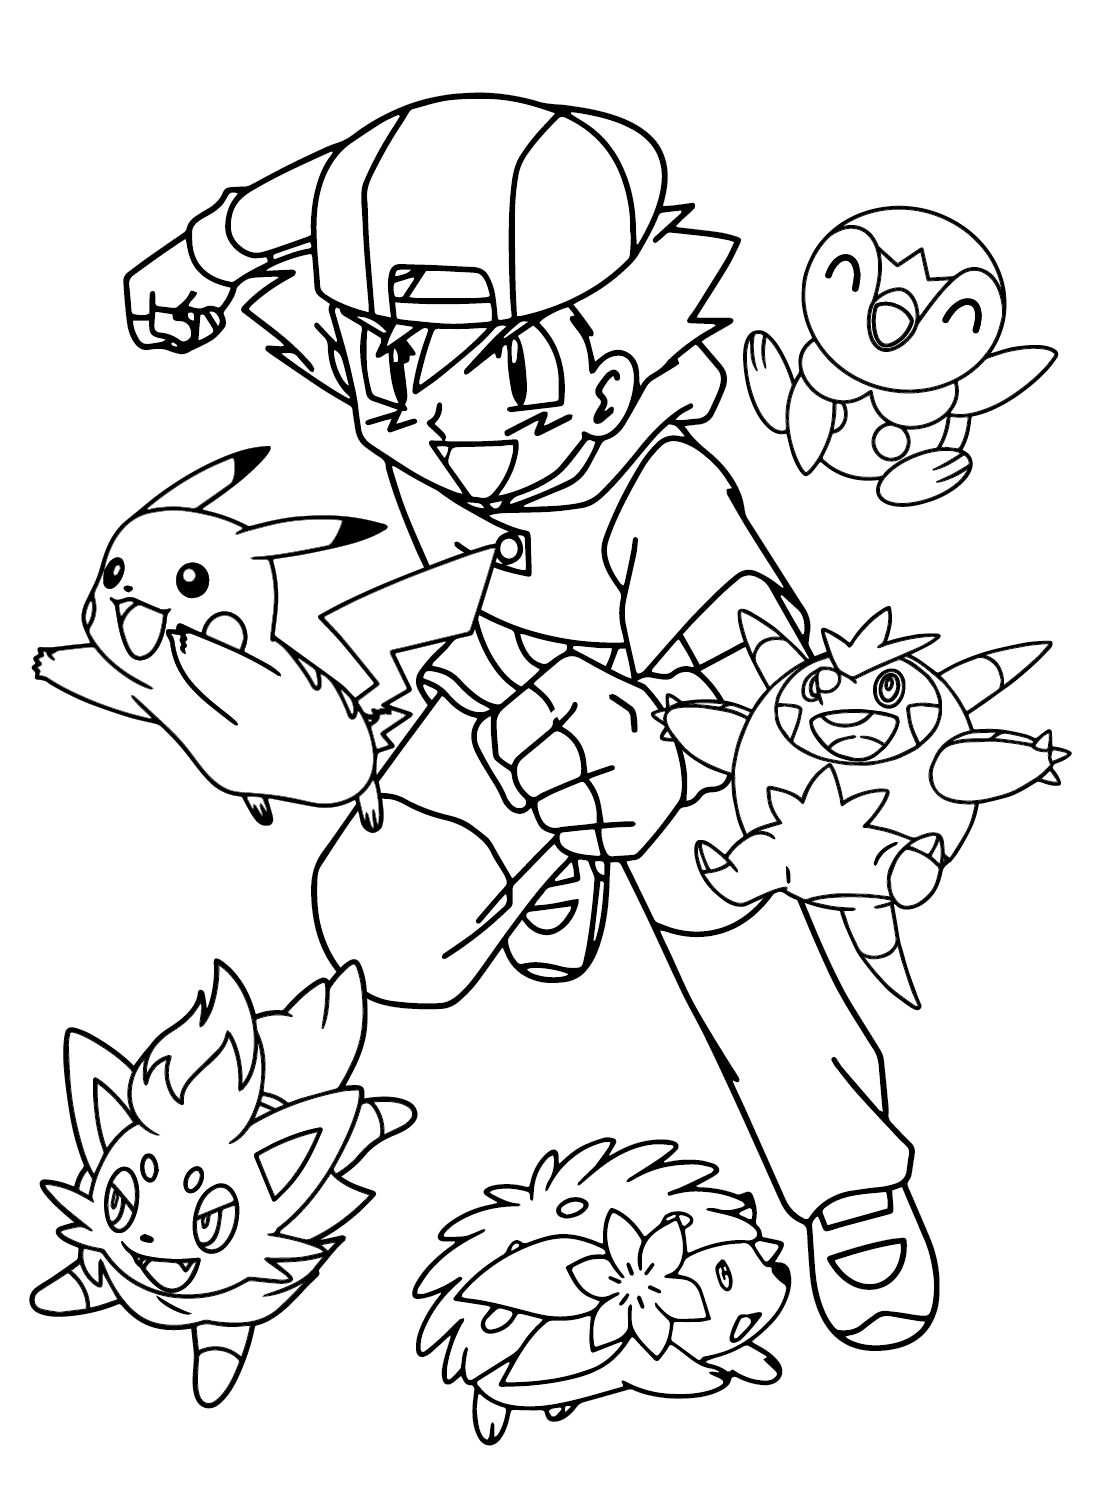 Ash Ketchum Coloring Pages to Drawing from Ash Ketchum